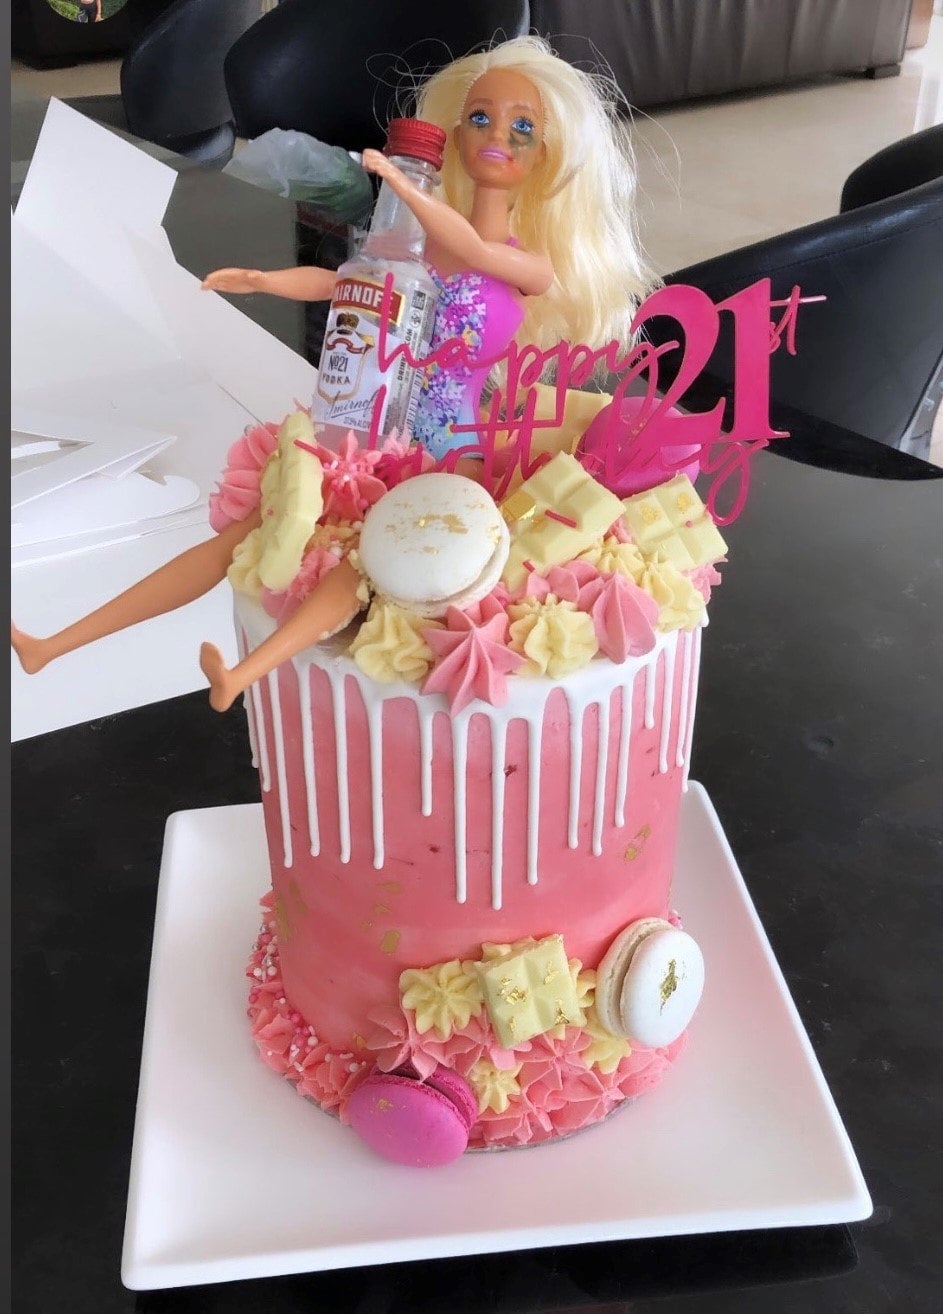 Drunken Barbie Cake, for that classy and fabulous girlfriend who loses it  after a few drinks. #drunkgirls #drunkbutfabulous #drunkbarbiecake  www.sweetsbyca… | Pêlos